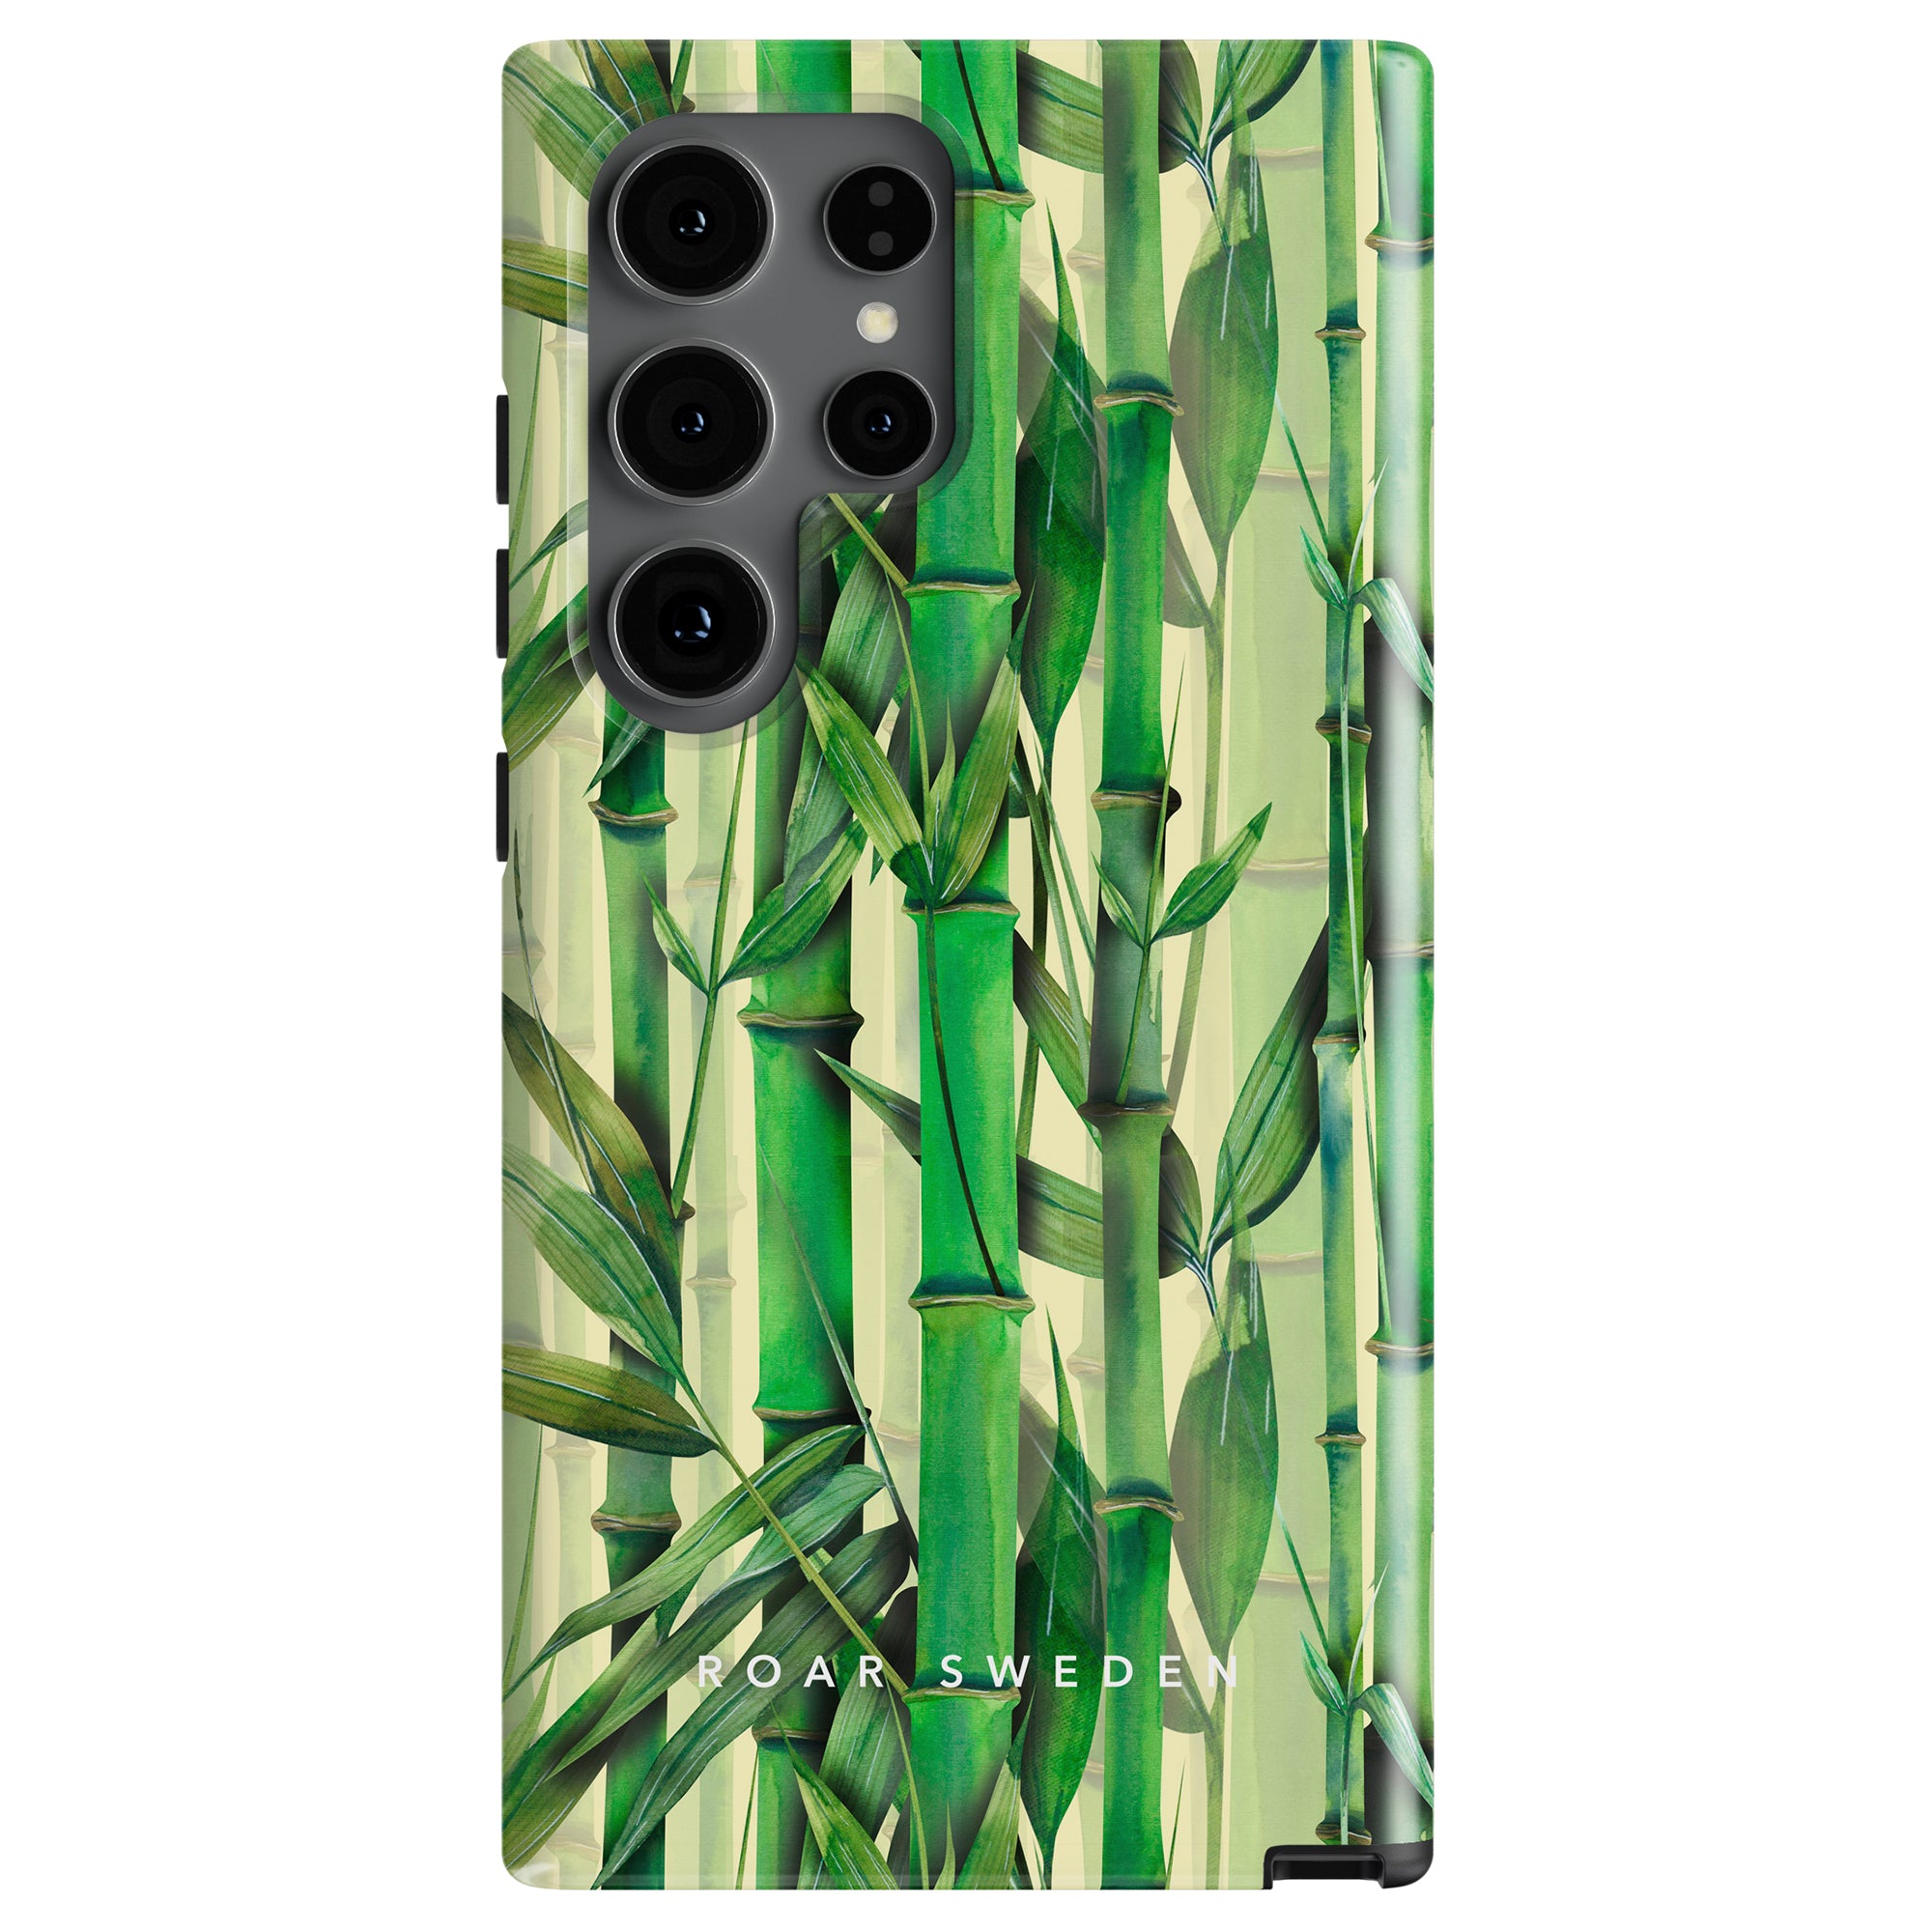 A smartphone with a Bambu - Tough Case and multiple camera lenses on the back. The brand name "R O A R S W E D E N" is printed at the bottom, offering both naturens skönhet design and högkvalitativt skydd.